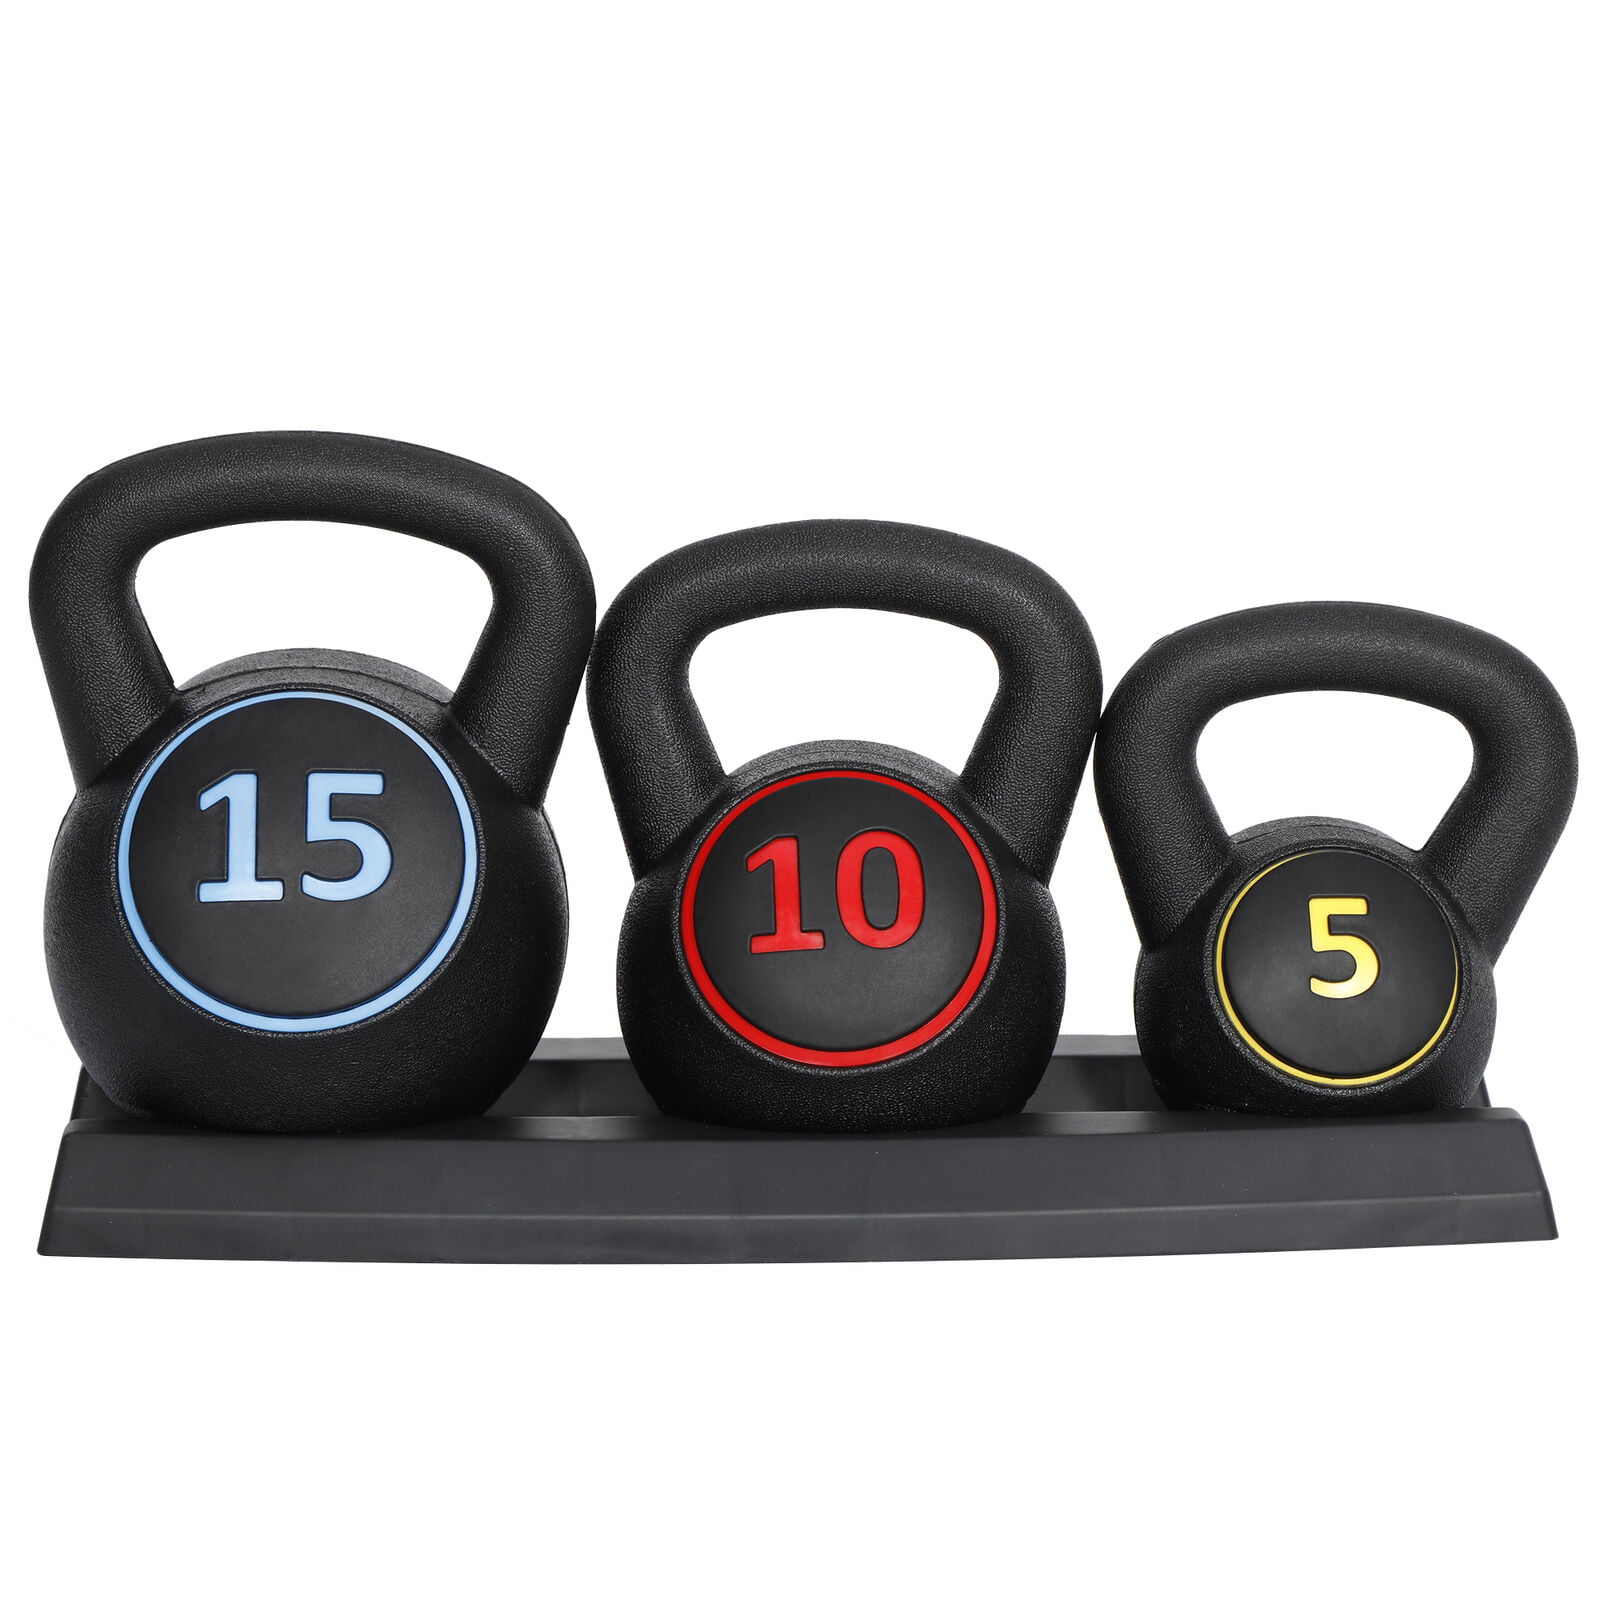 Details about   3-Piece Kettlebell Fitness Strength Training Exercise Muscle With Base Rack Gym 